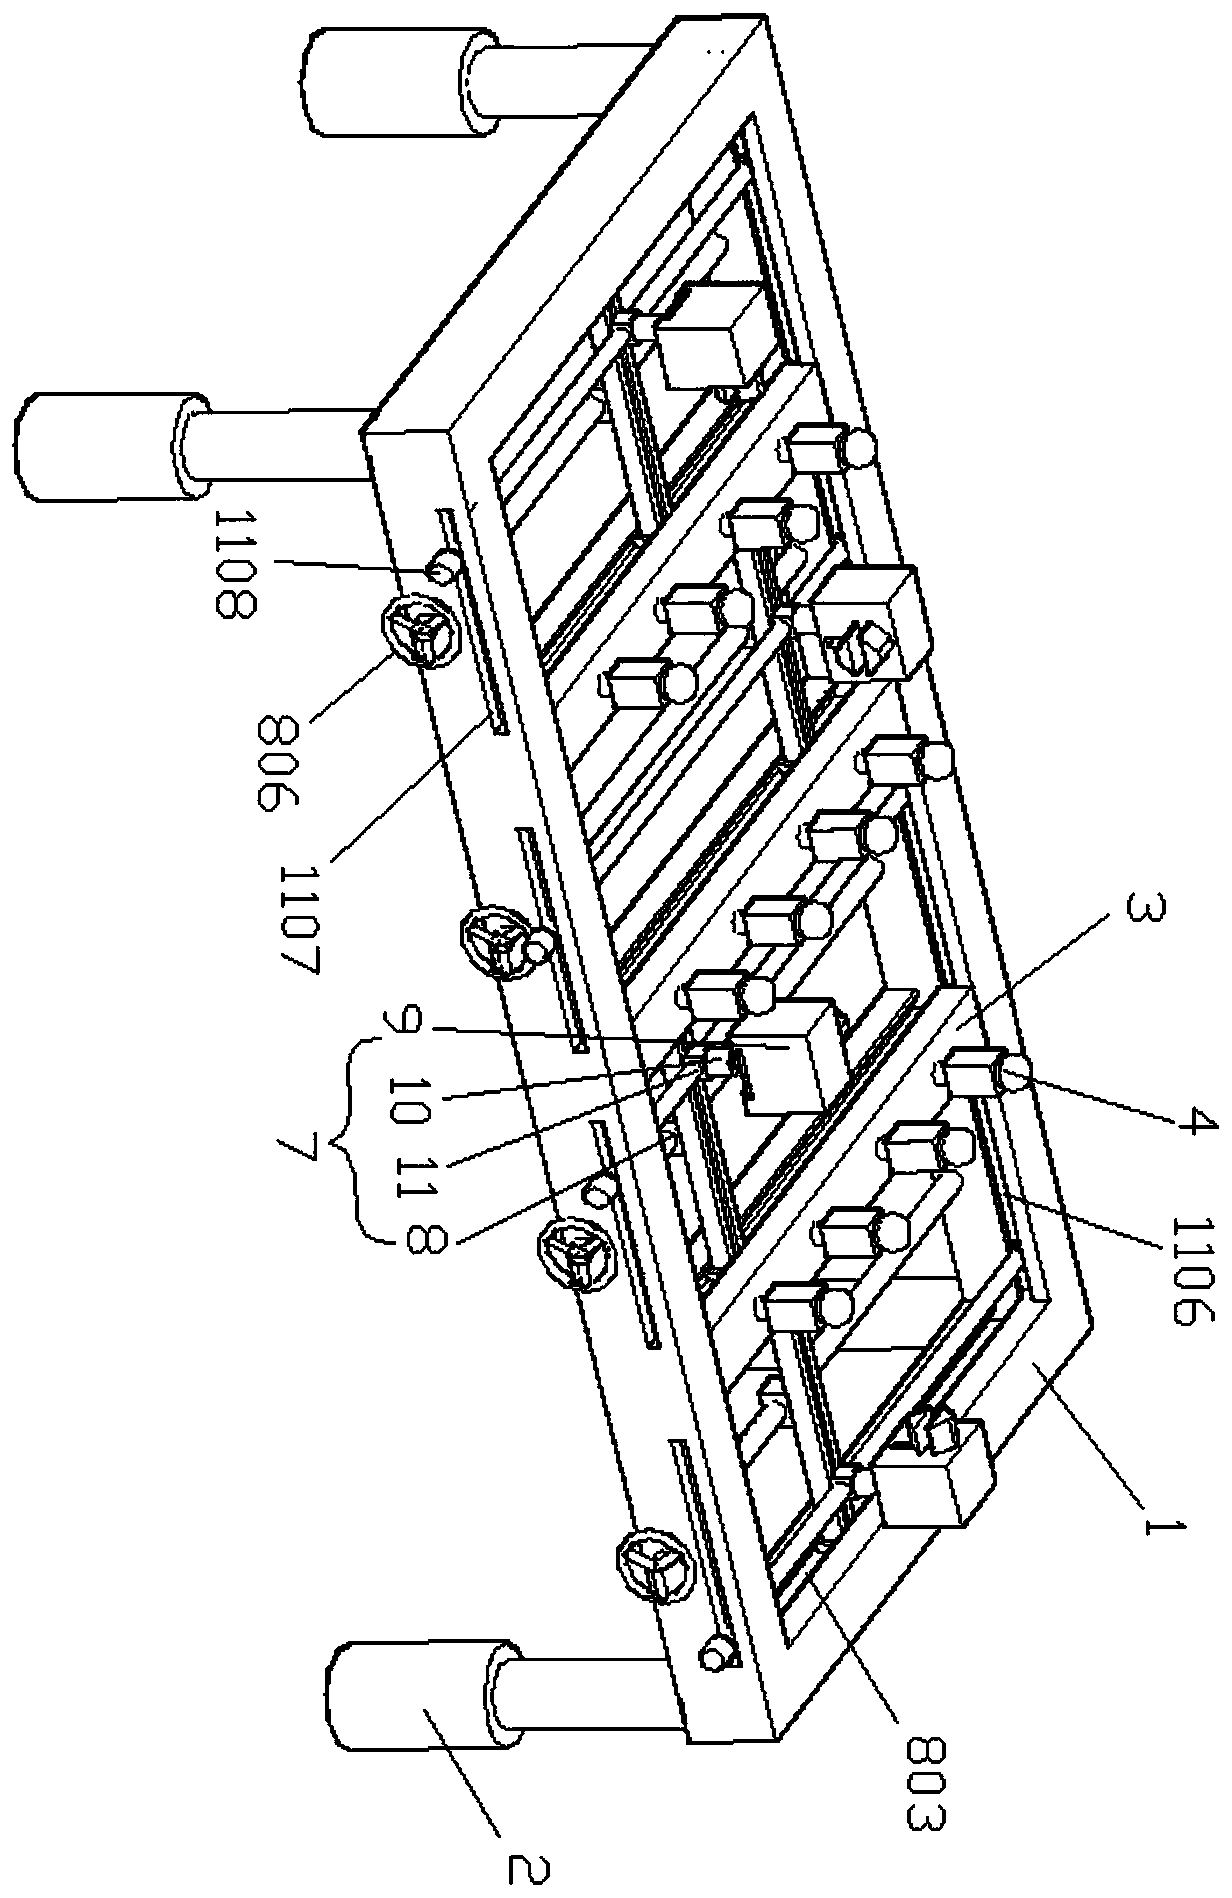 Glass substrate operating platform with clamping devices